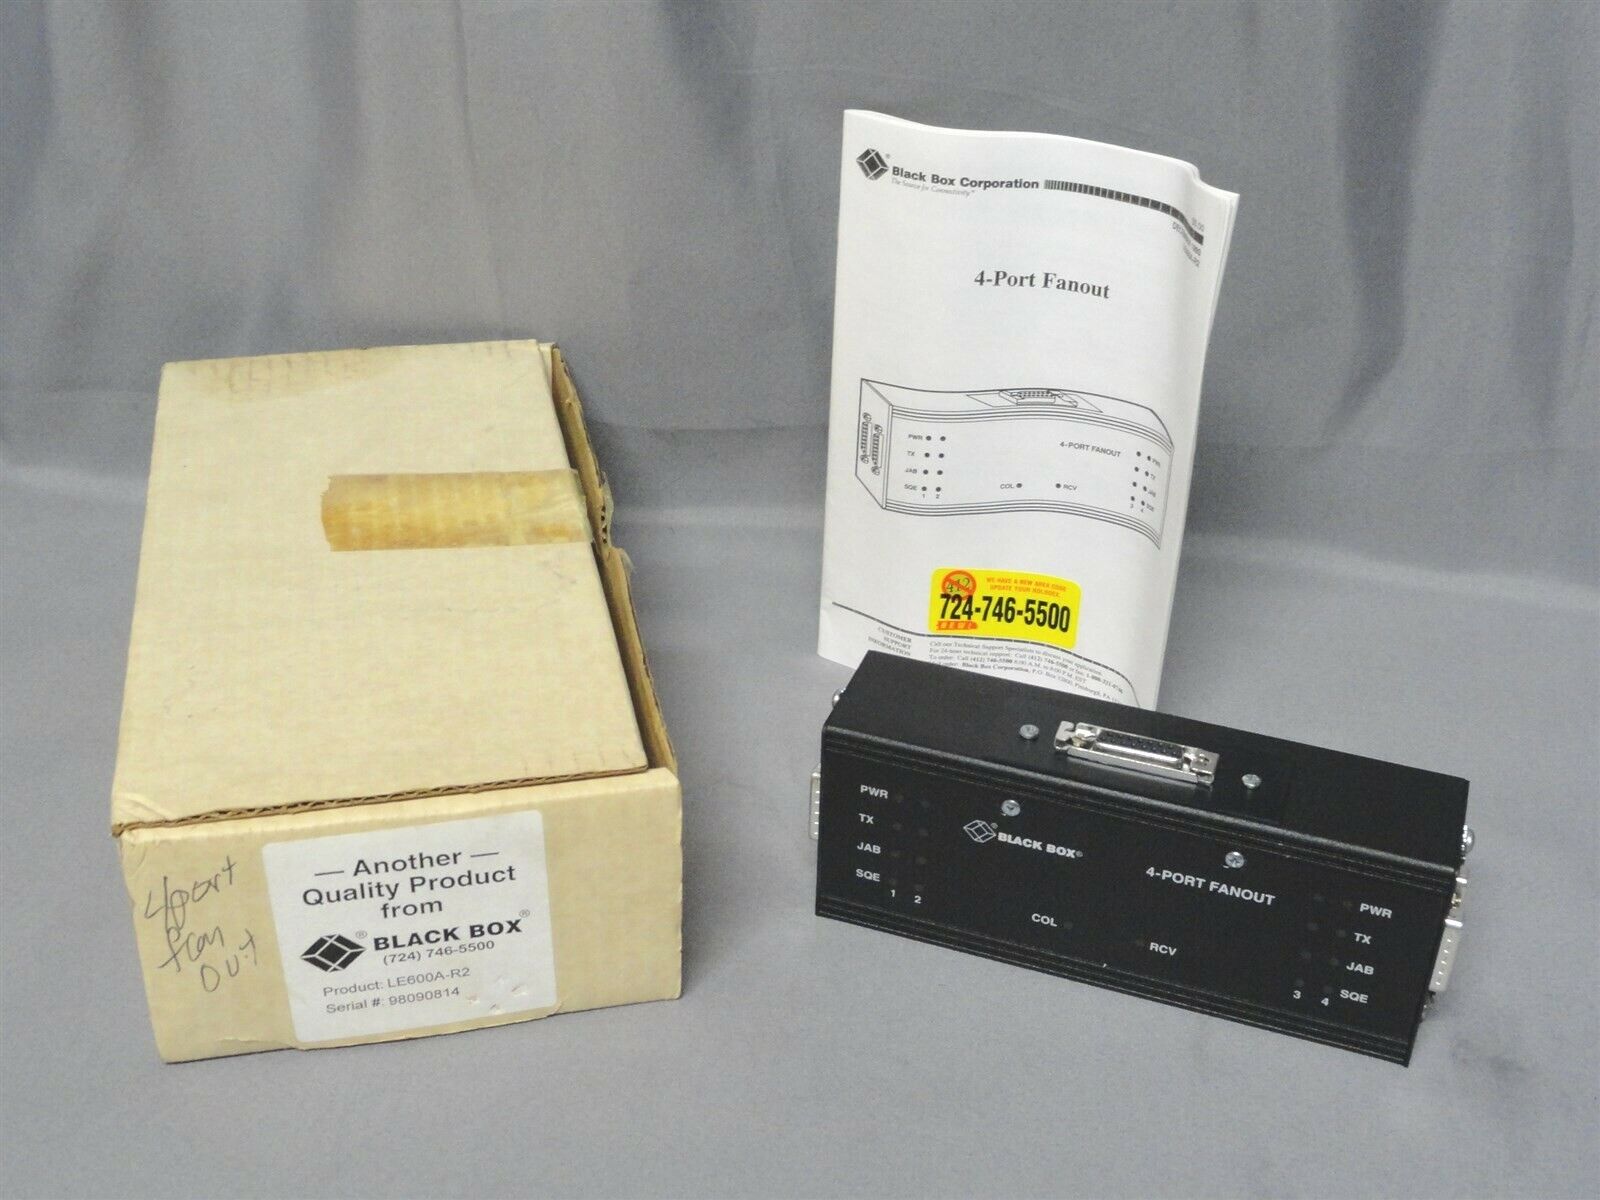 BLACK BOX - 4 PORT FANOUT - PART NUMBER: LE600AR-2 - NEW IN THE BOX